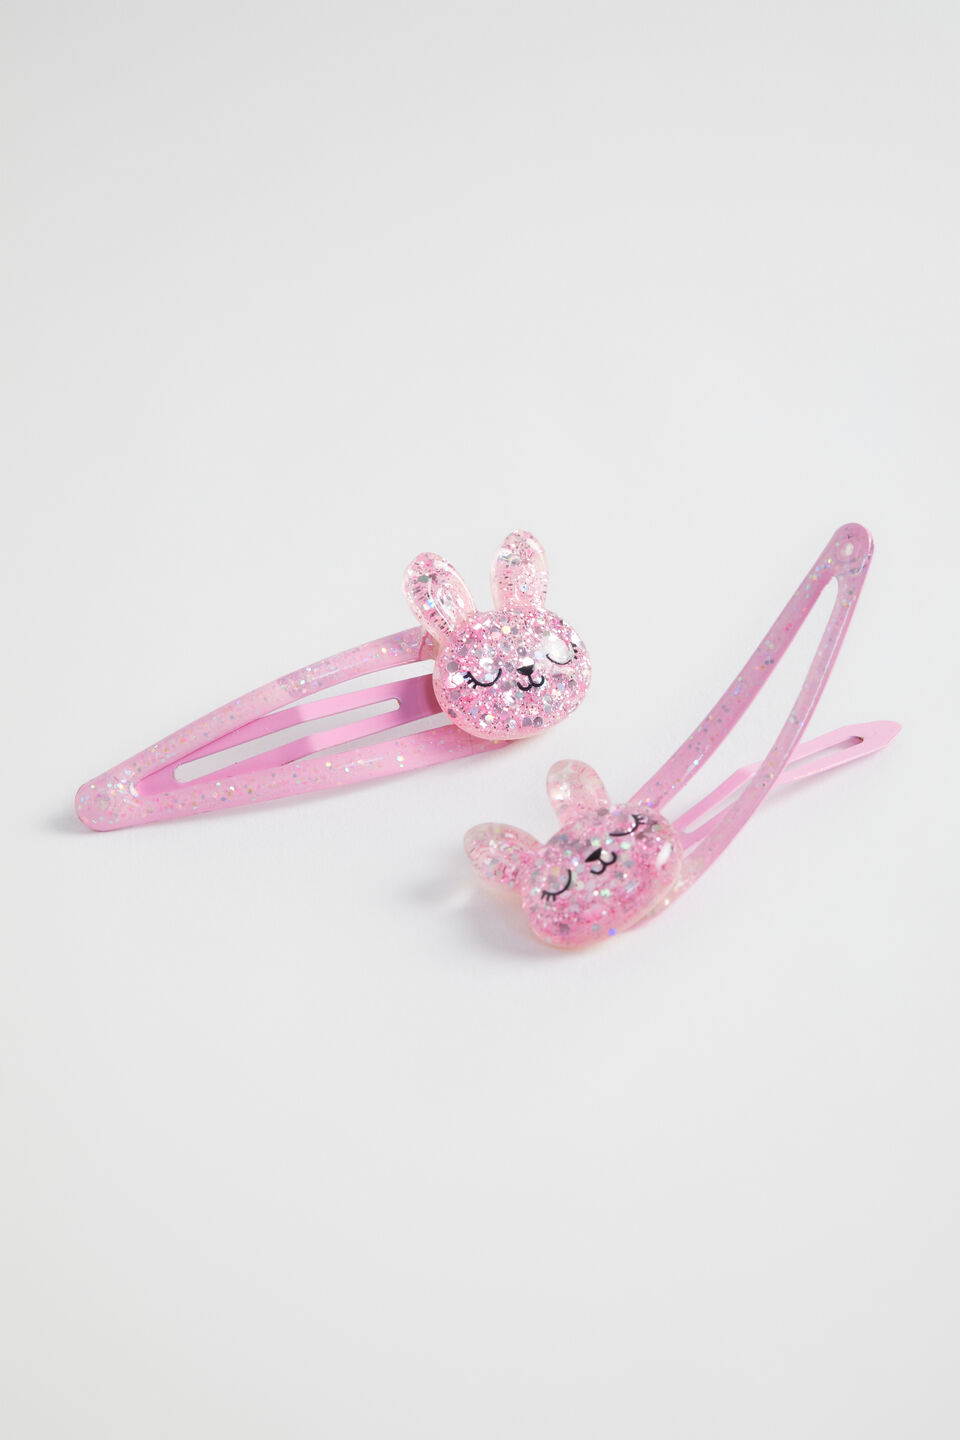 Glitter Acrylic Bunny Snaps  Candy Pink